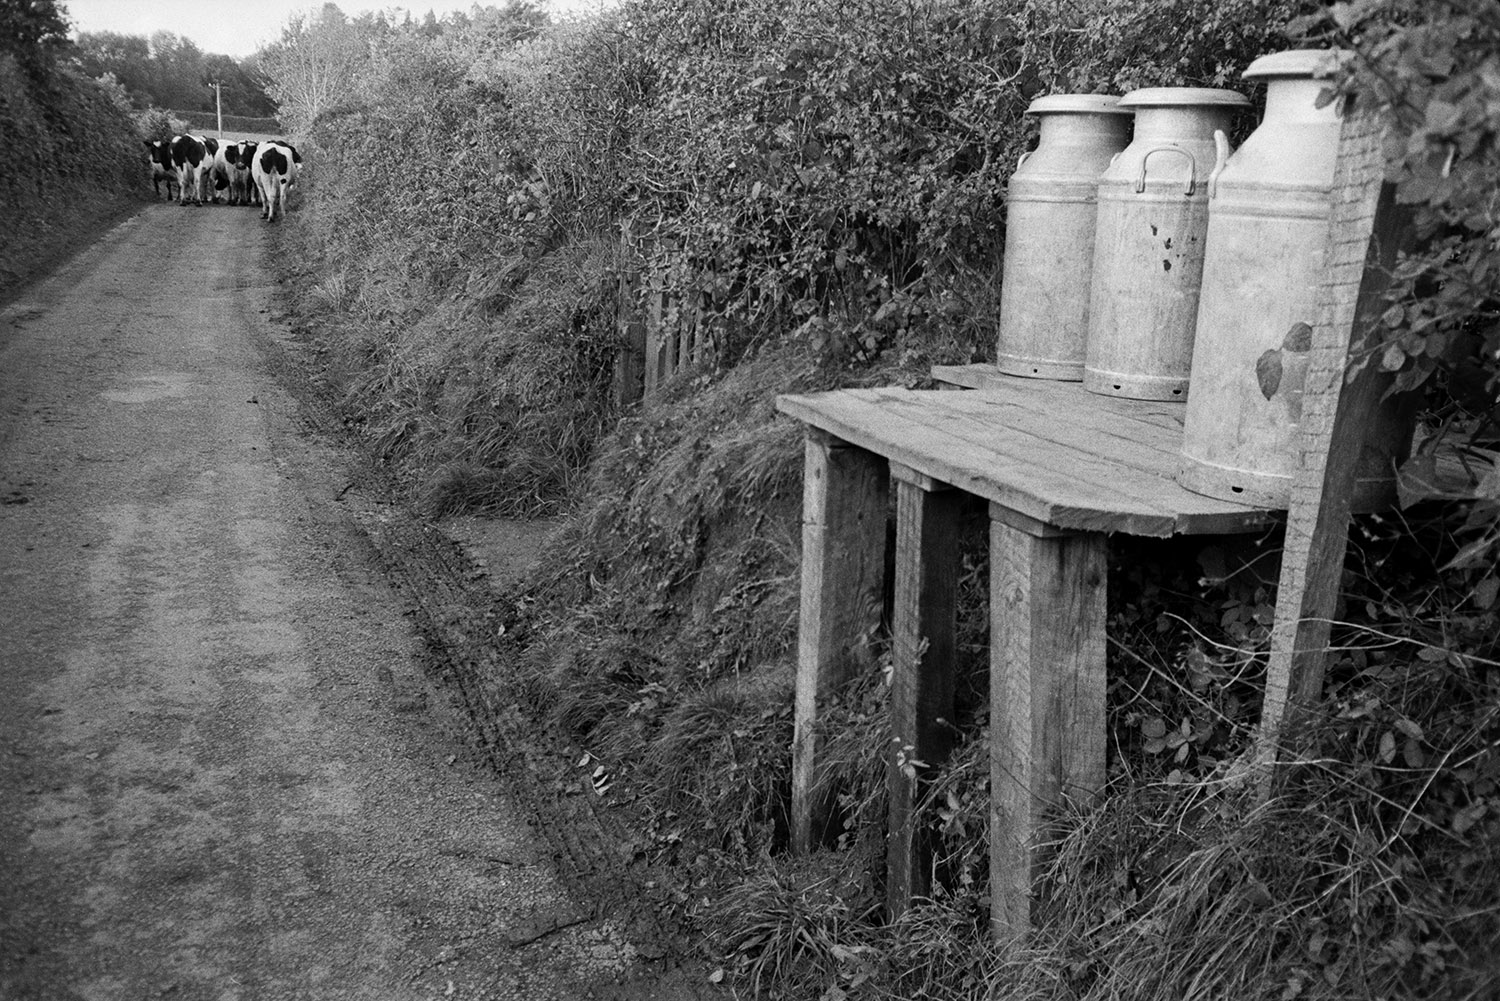 Milk churns on a wooden milk churn stand by a lane in Dolton. Cows are walking down the lane away from the milk churns, in the background.